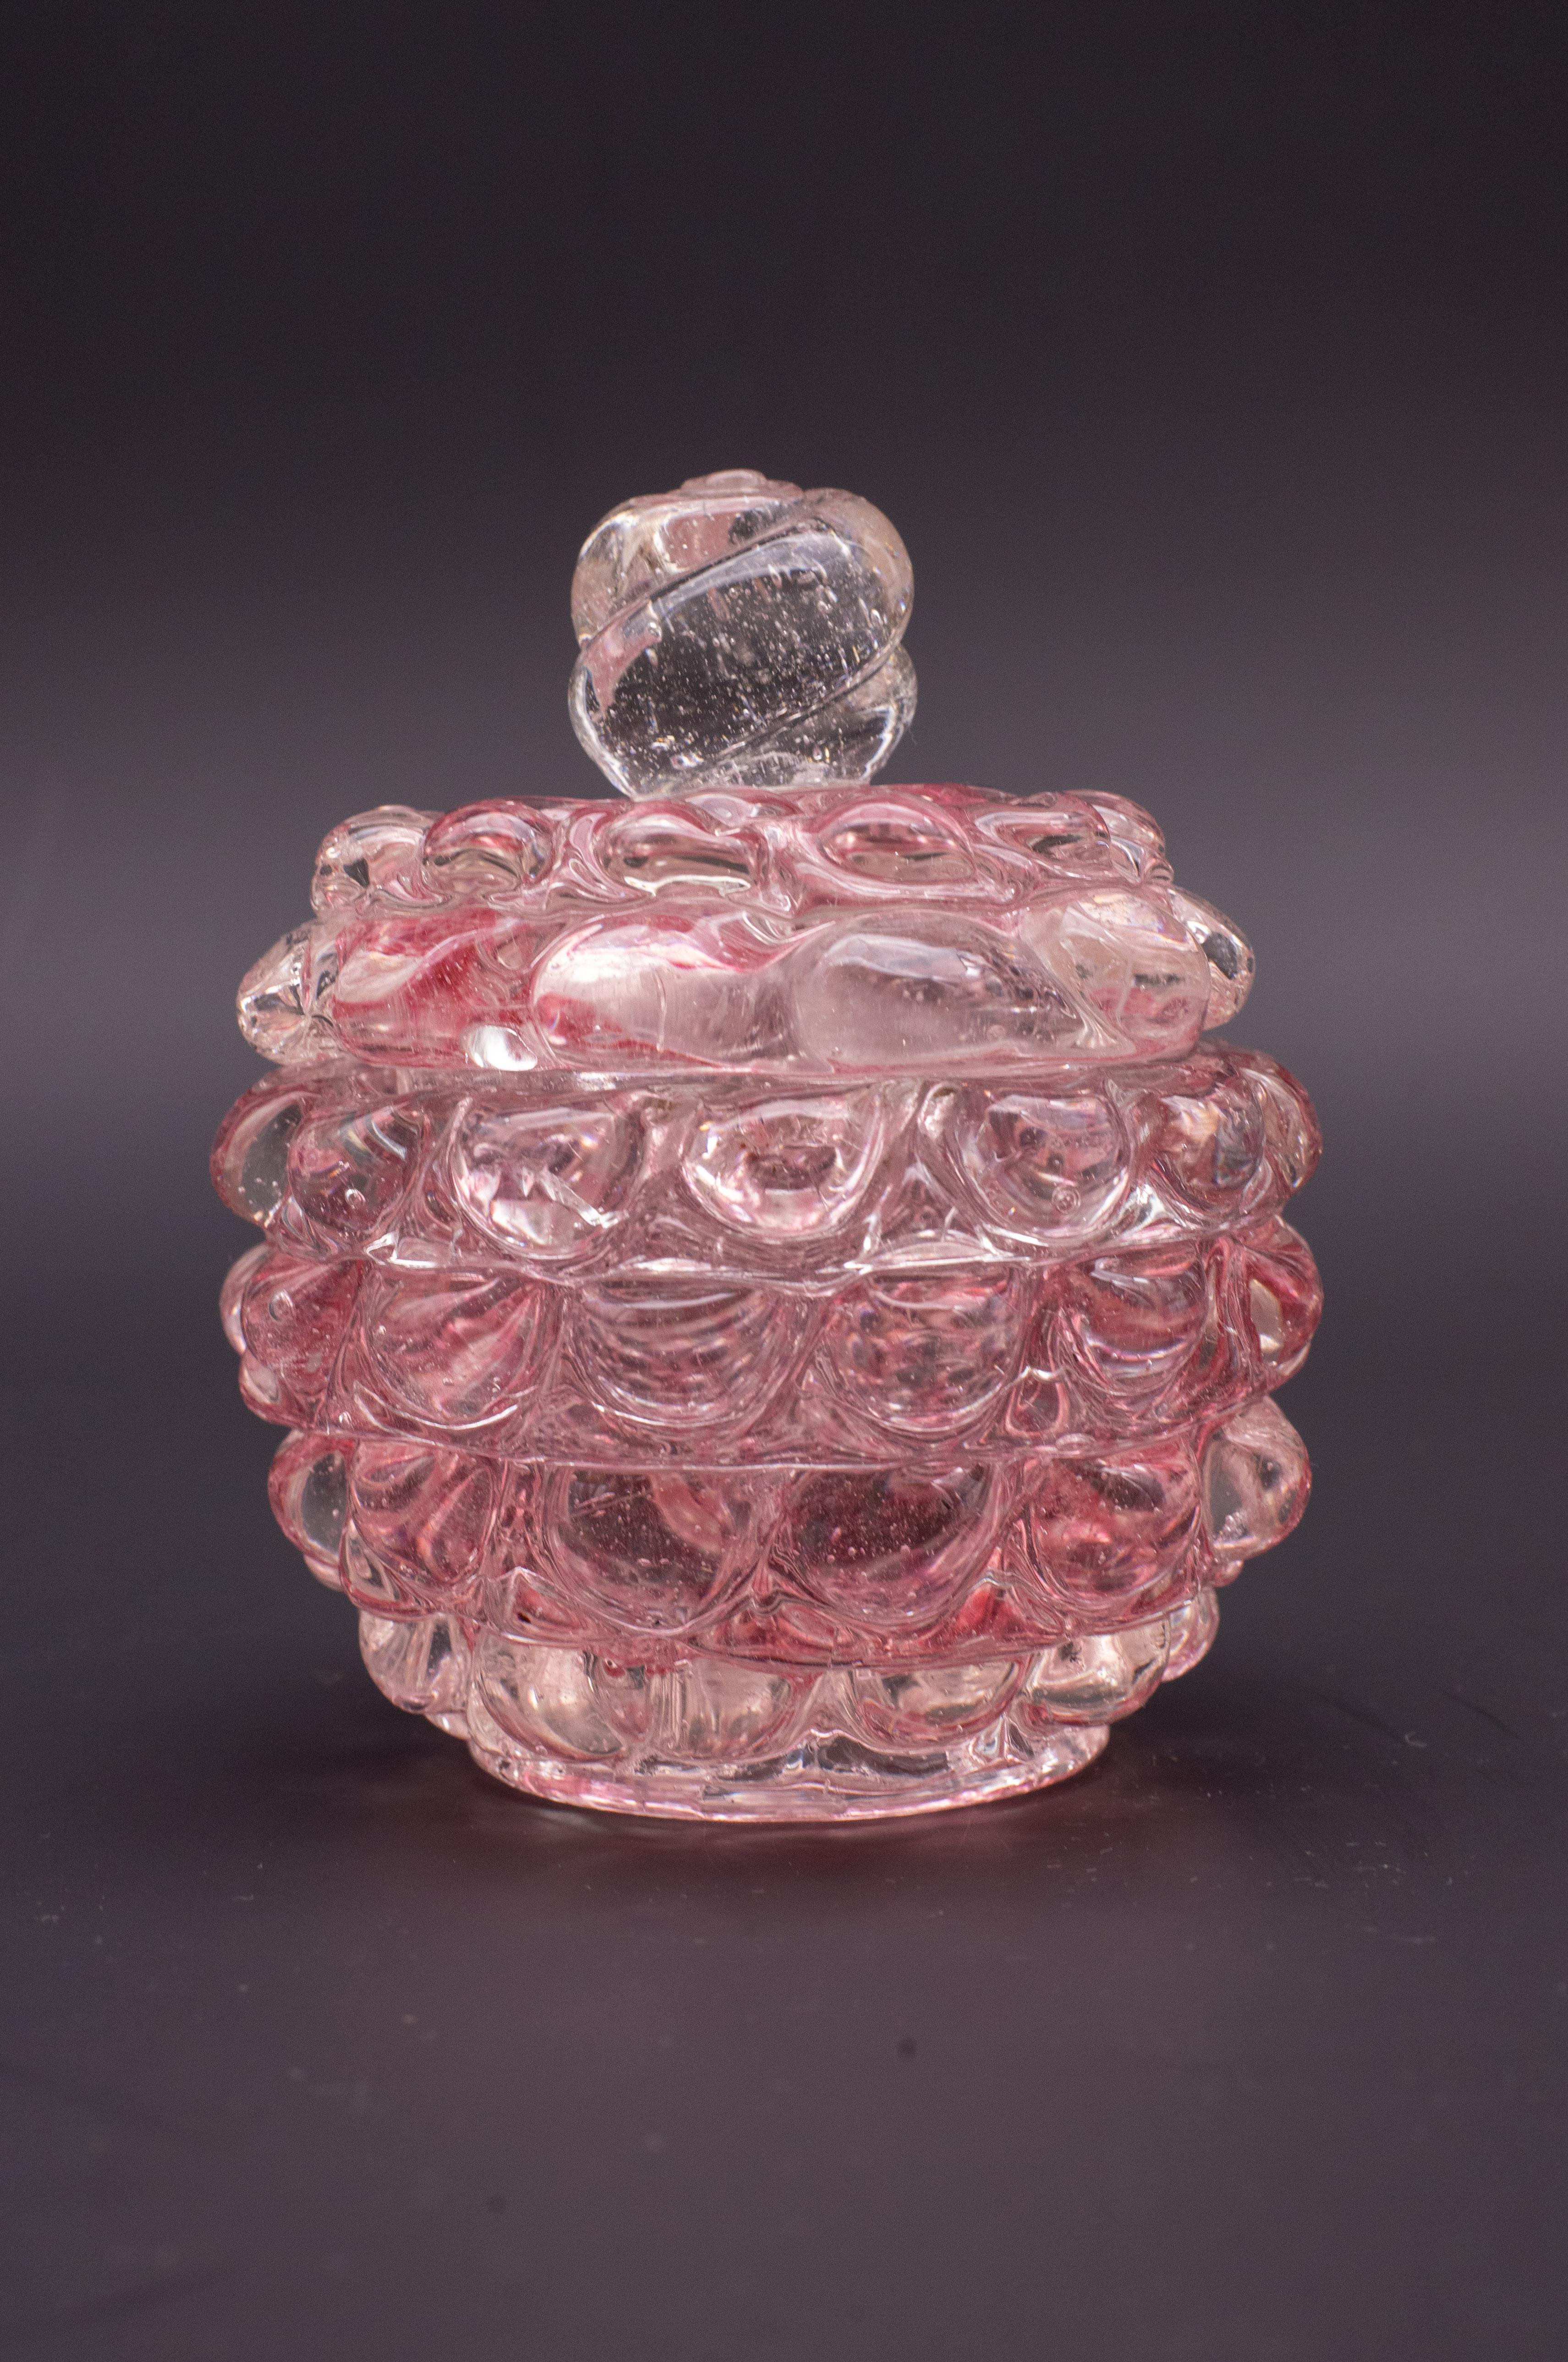 Extraordinary and unique rare pink lens series vase by Barovier and Toso glassworks, period 1940.

The vase is 12 centimeters high and 12 centimeters in diameter.

Excellent vintage condition.

The other transparent vases are not included with the